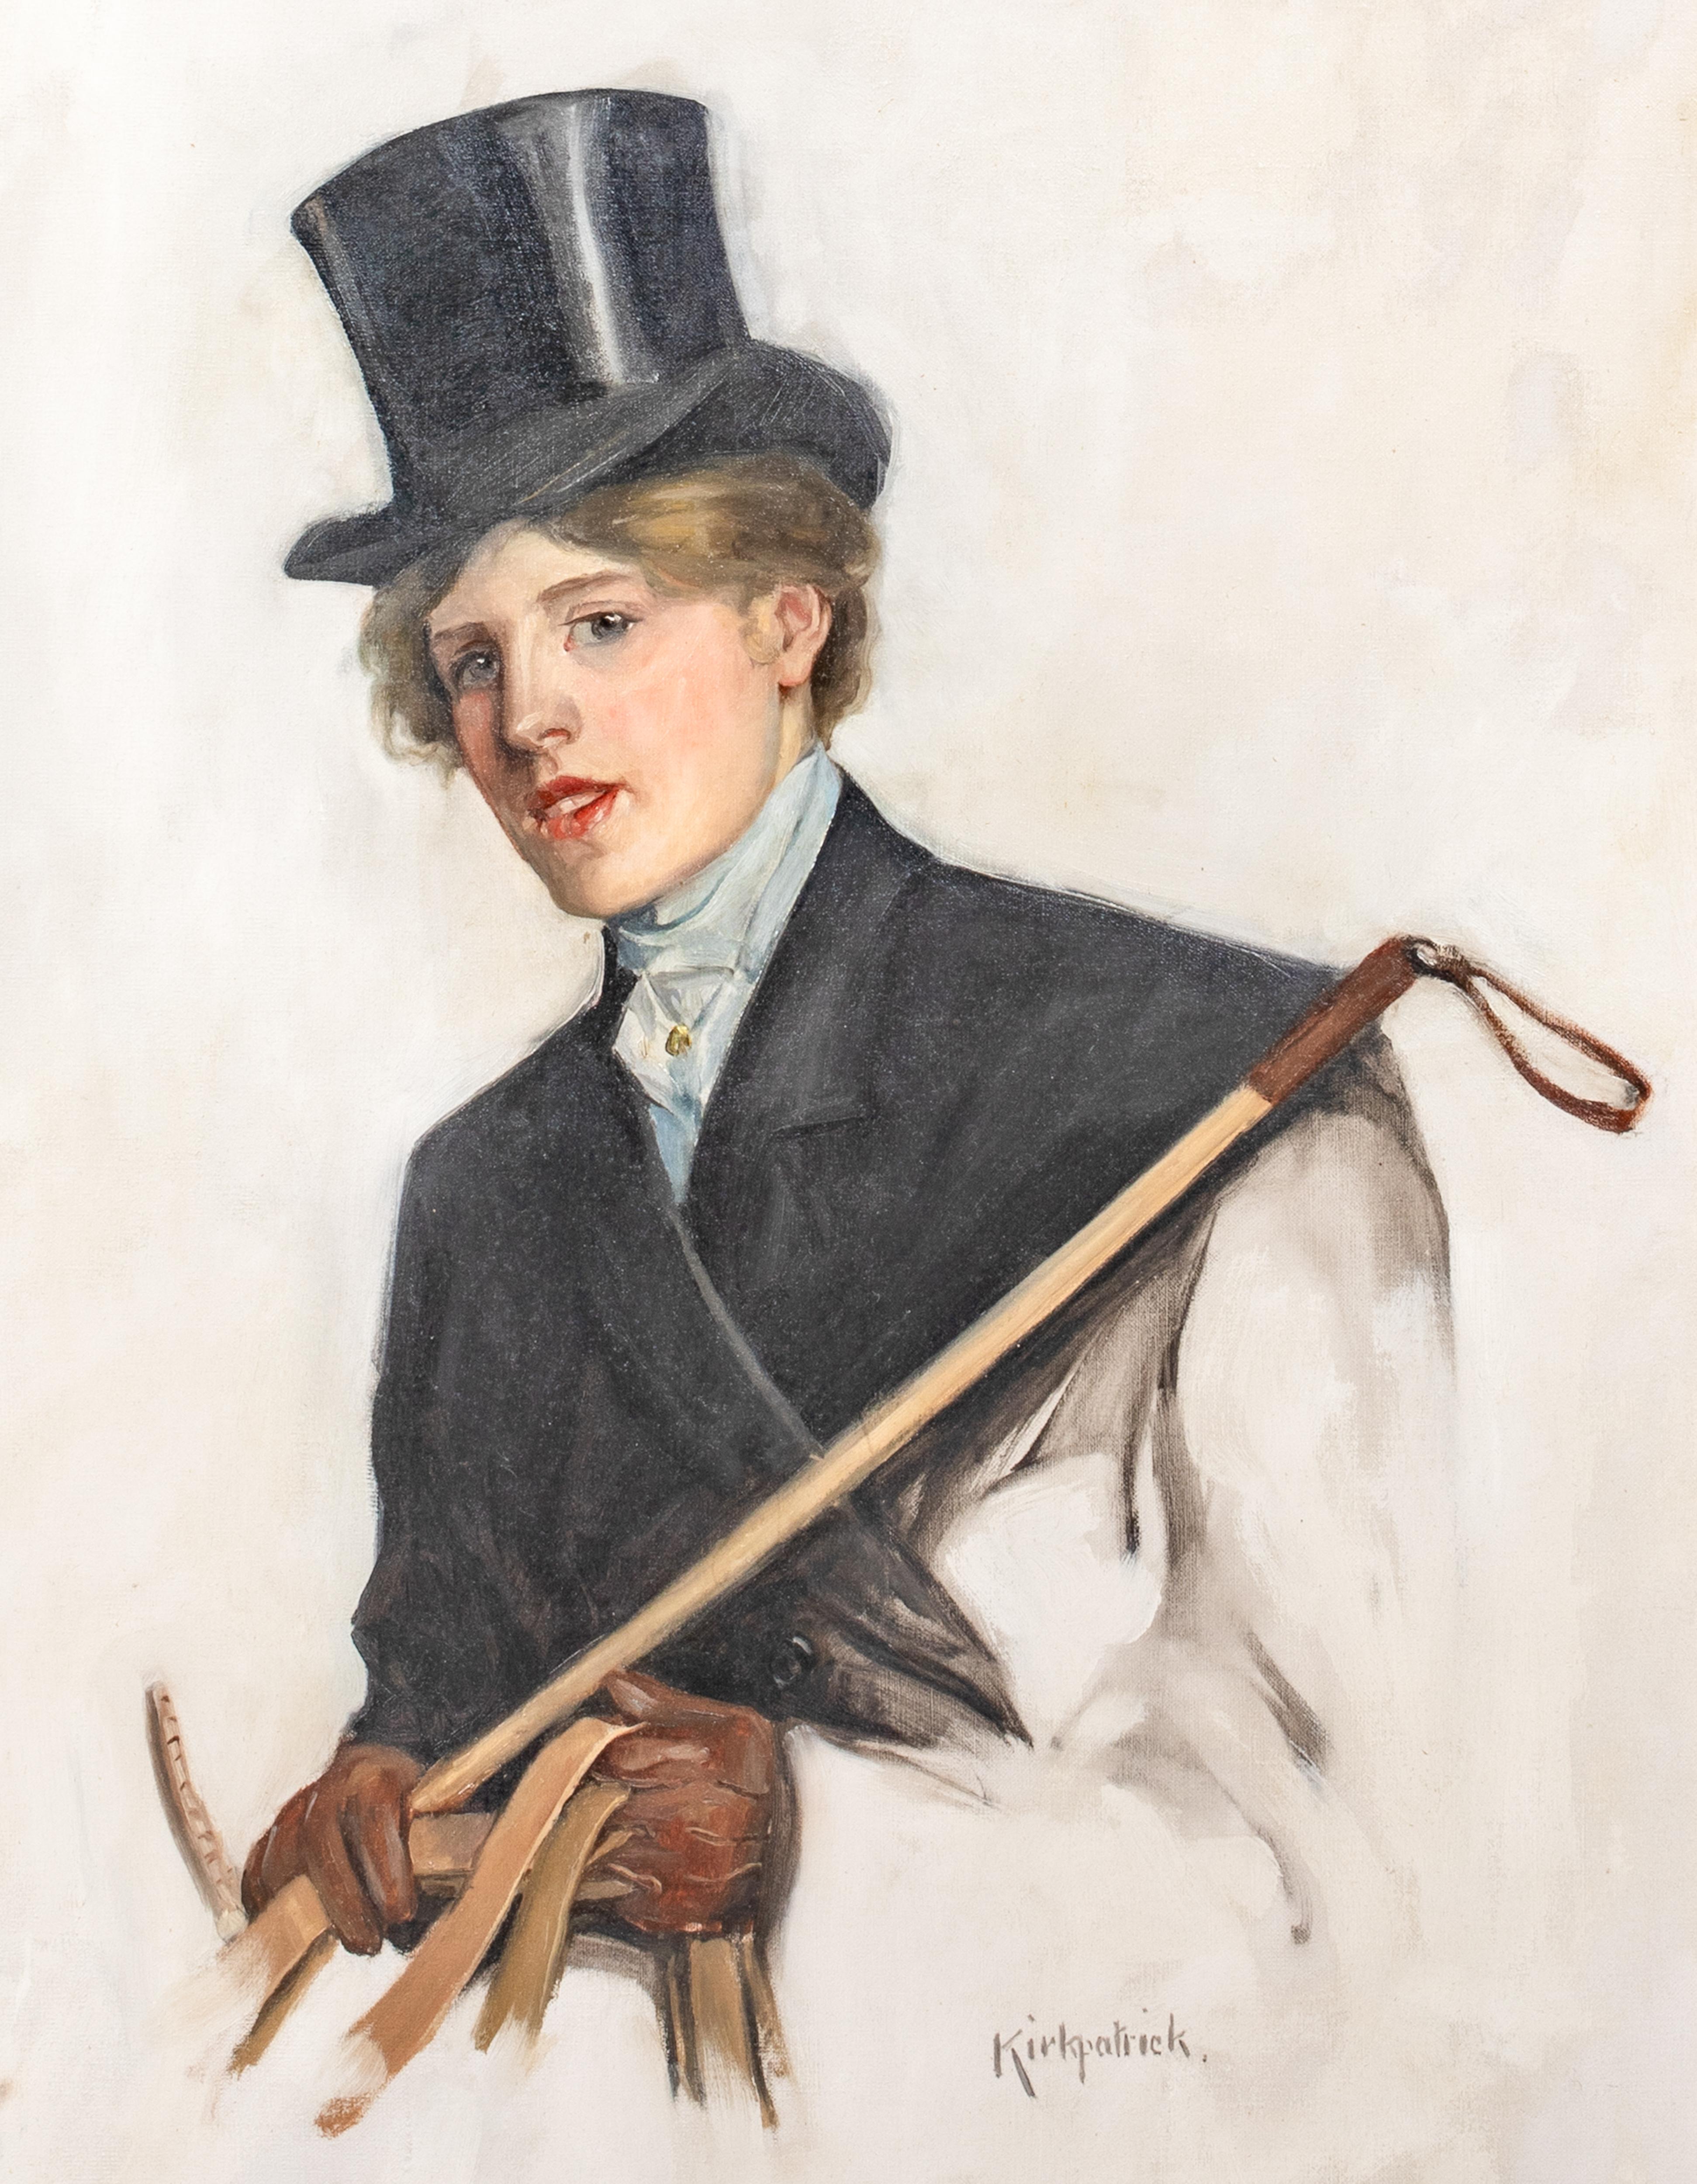 Portrait Of A Lady In Riding Attire, circa 1930 by Ethel KIRKPATRICK (1869-1966) For Sale 3